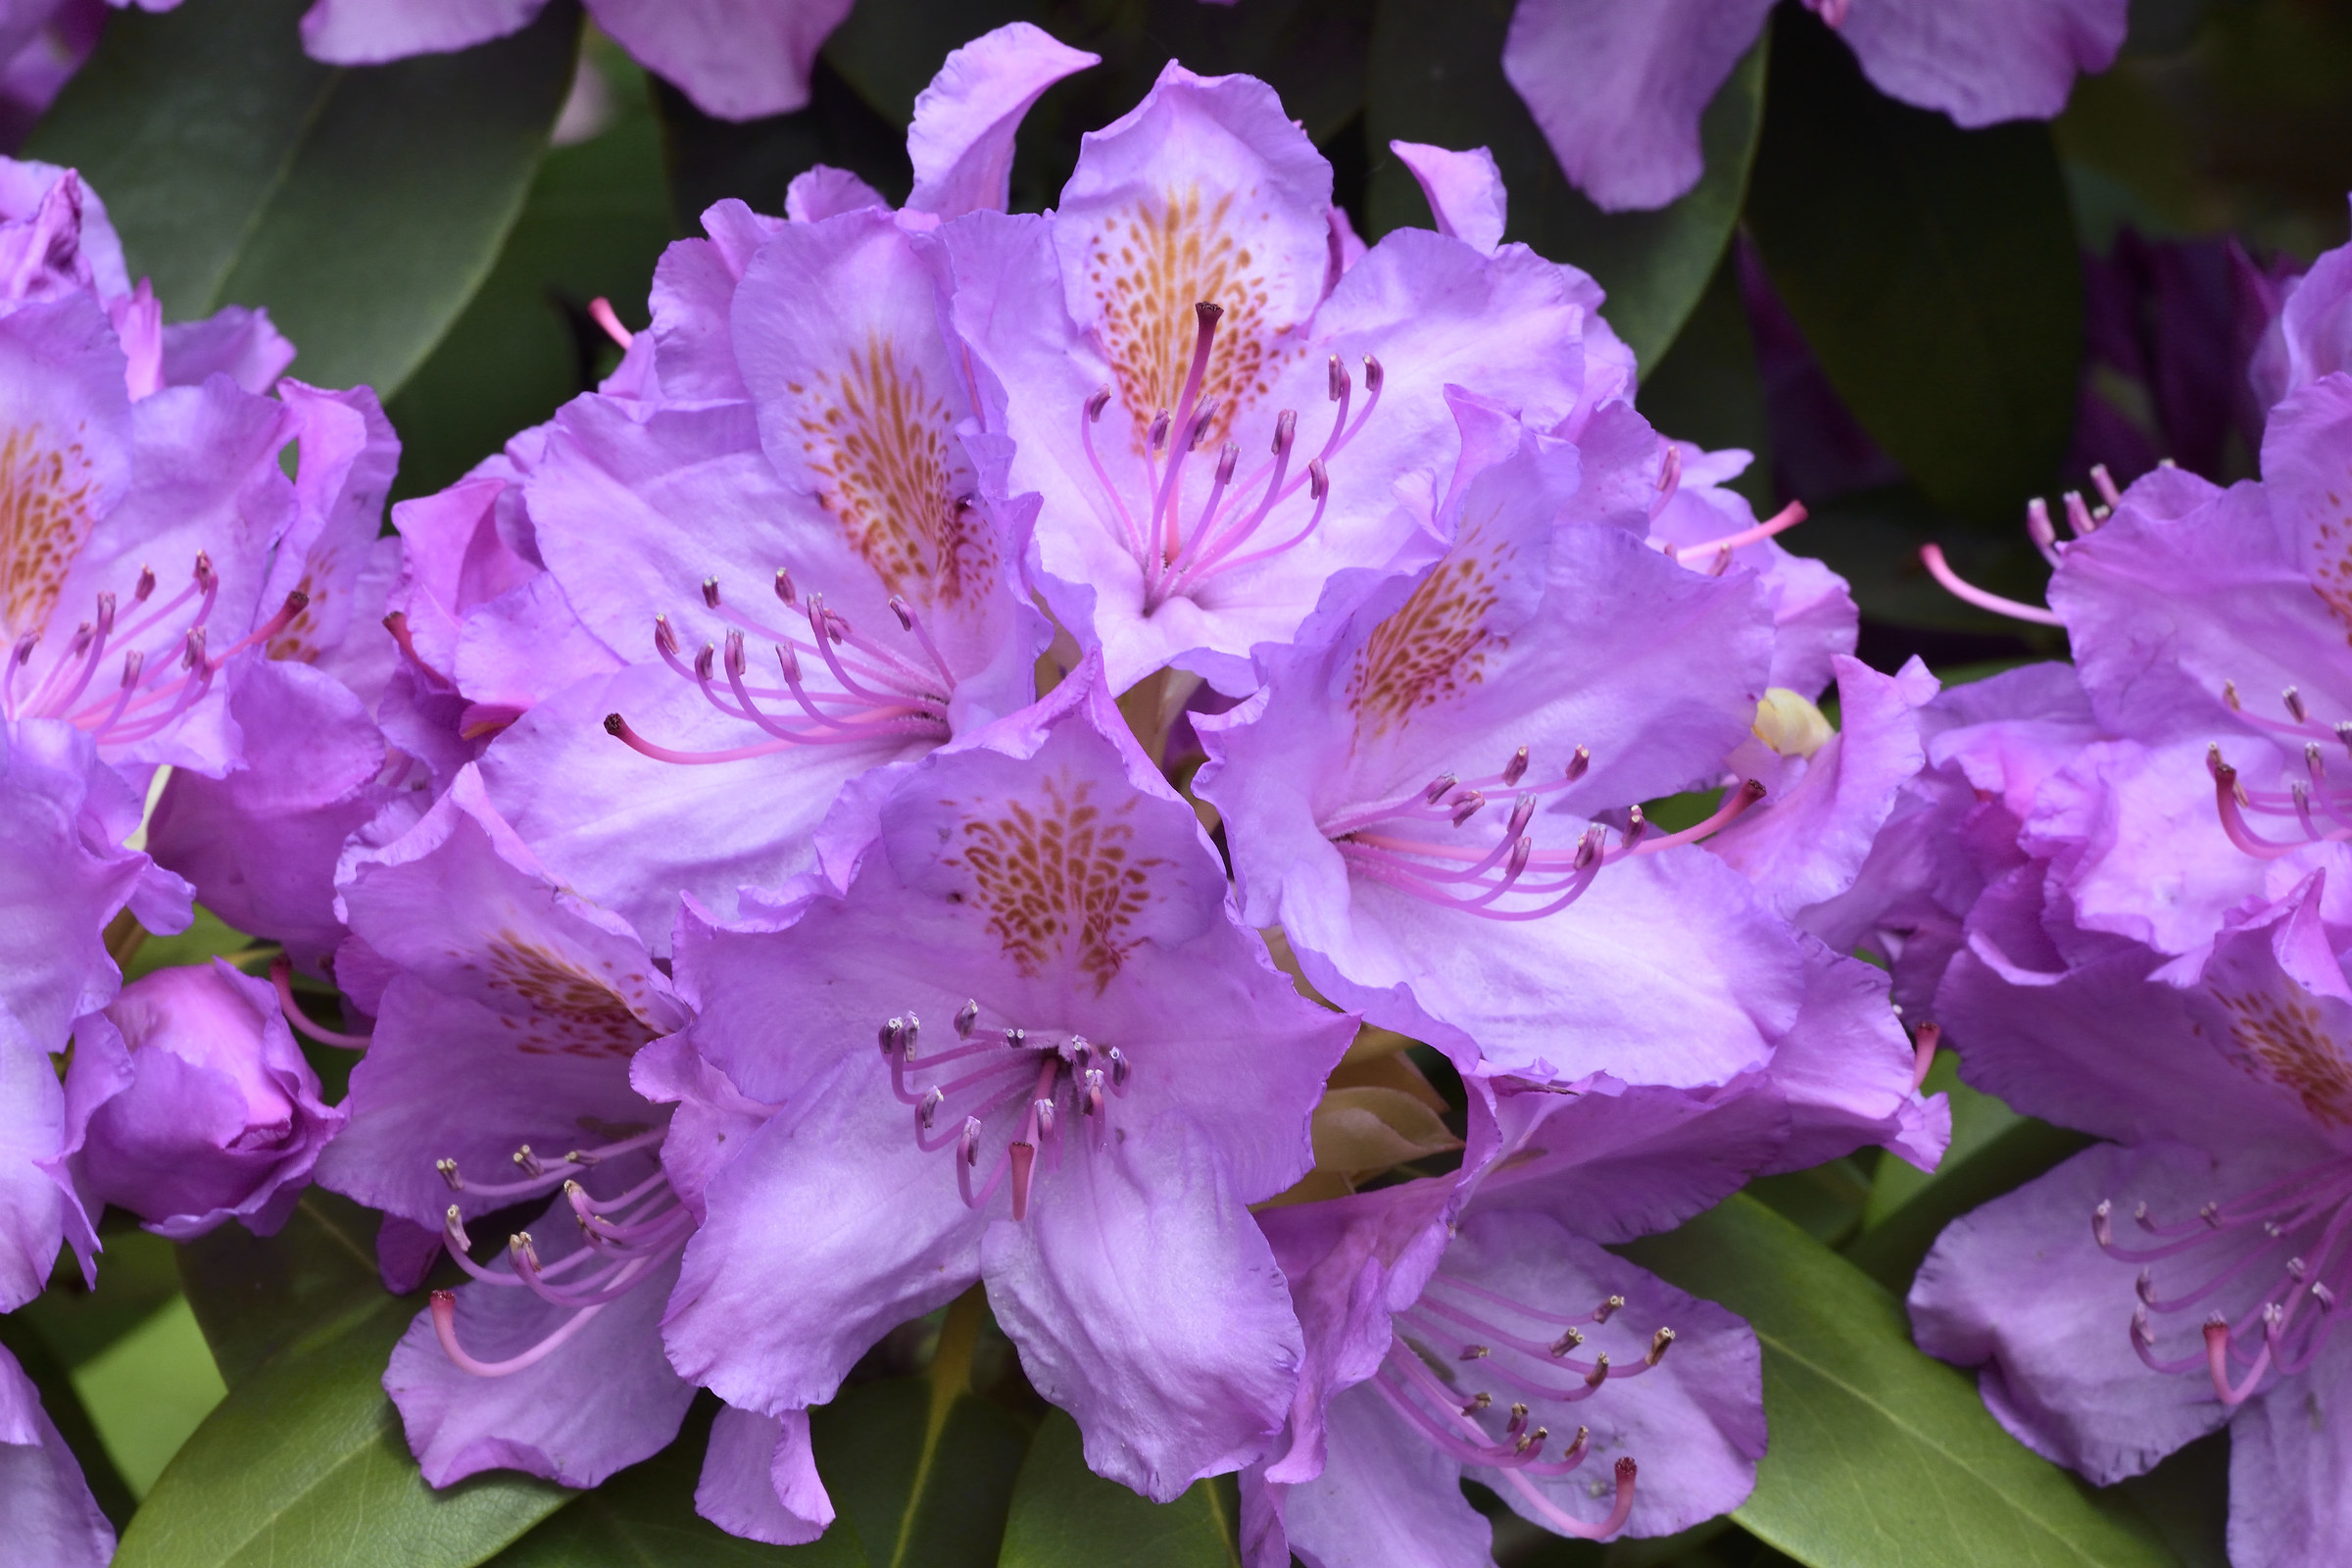 rhododendron...